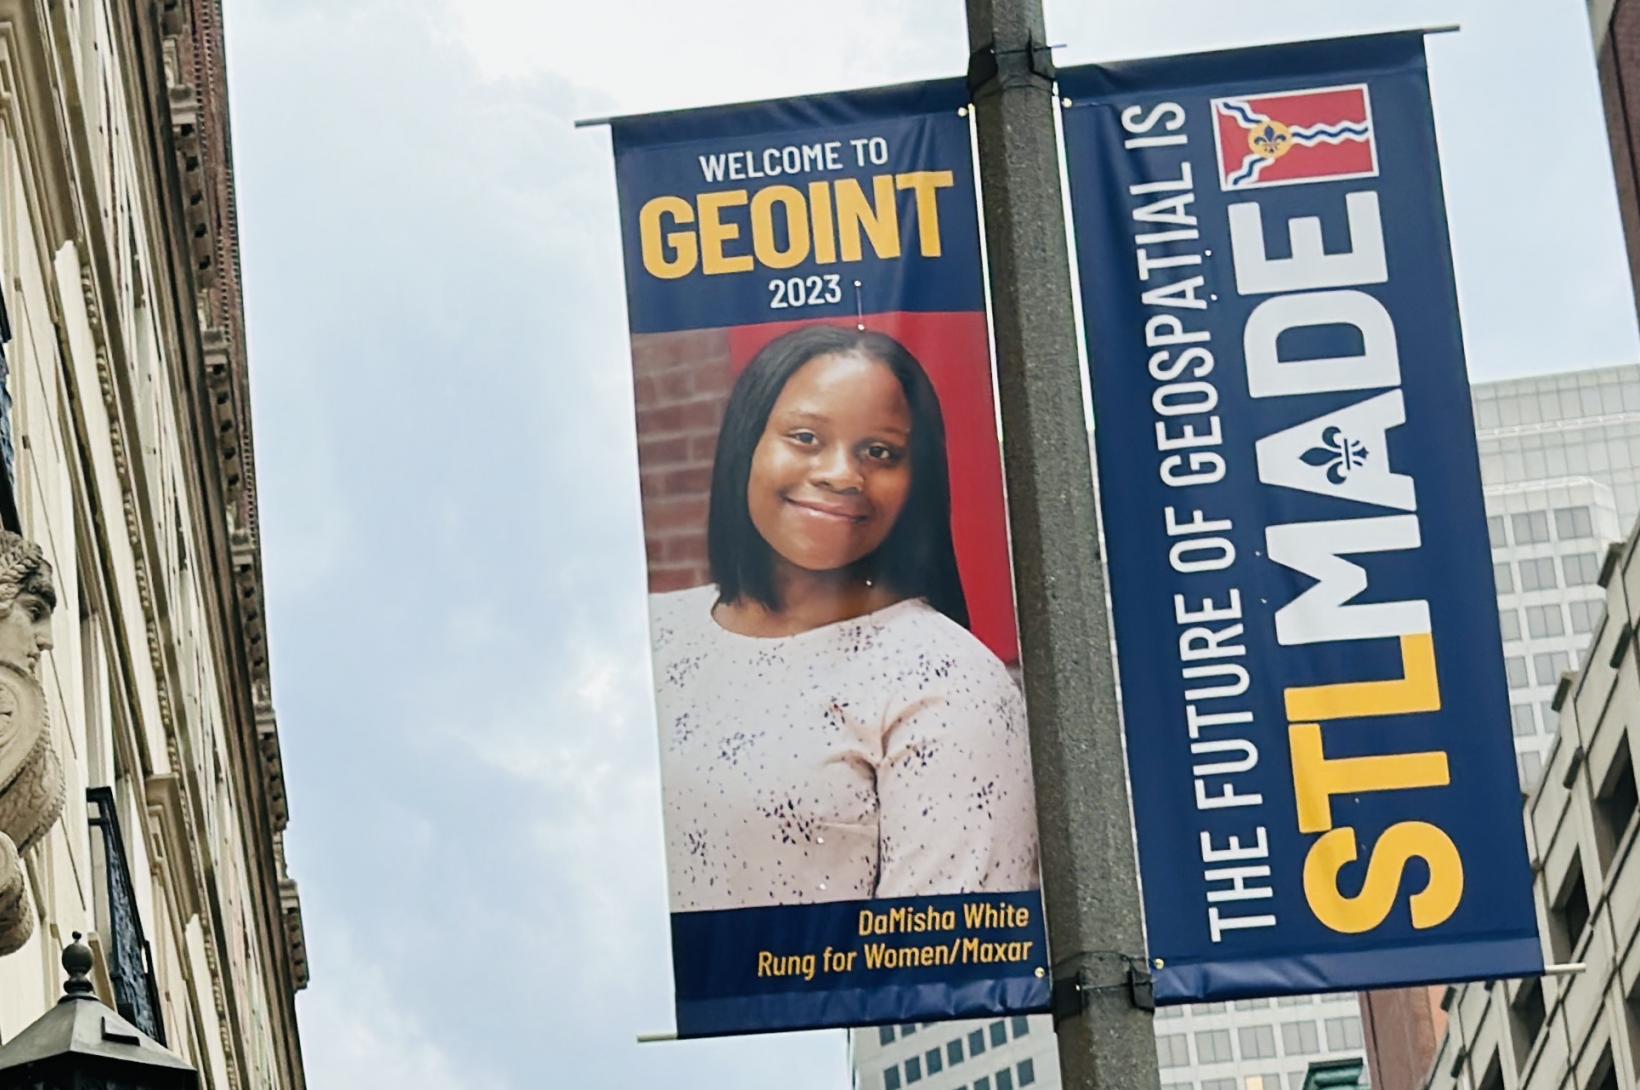 Photo of Downtown St. Louis banners welcoming visitors to GEOINT 2023